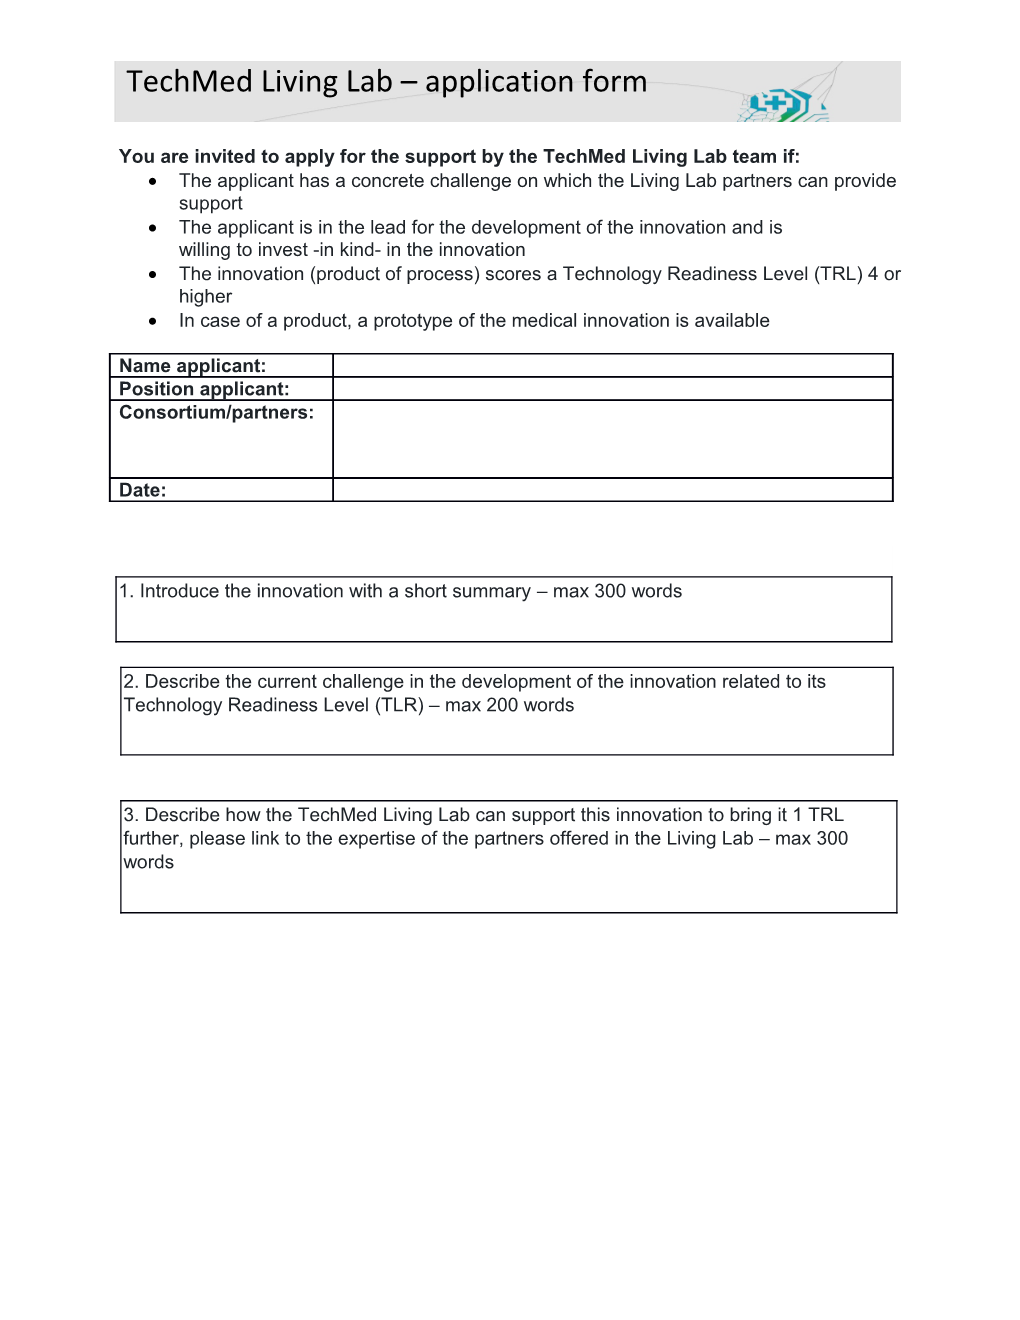 Techmed Living Lab Application Form